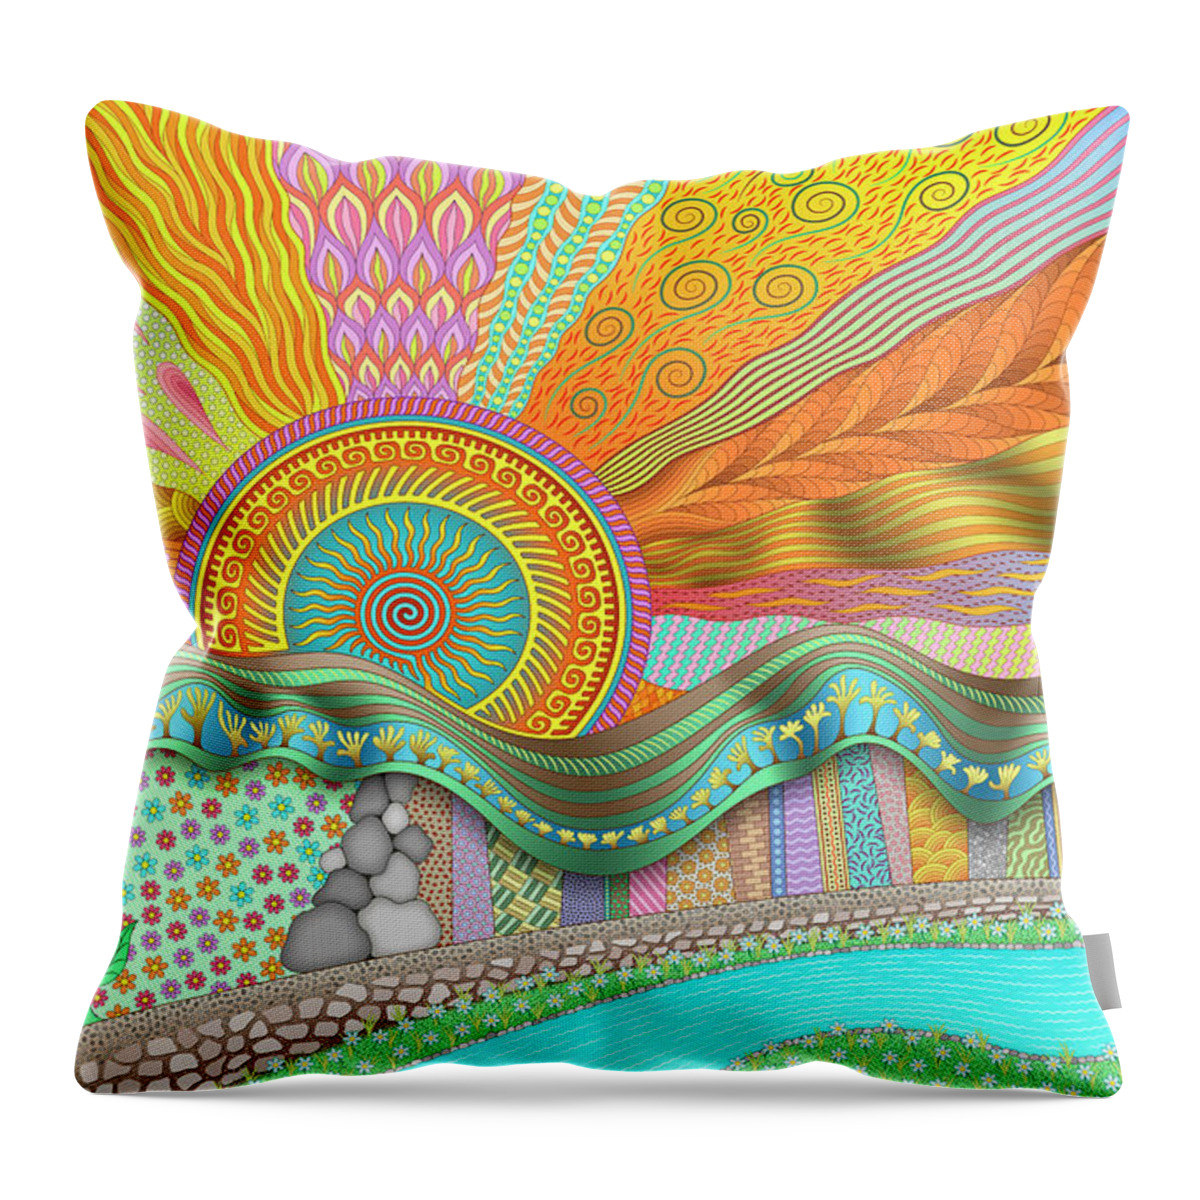 Imaginary Lands Throw Pillow featuring the digital art Sunrise In Finger Tree Forest by Becky Titus